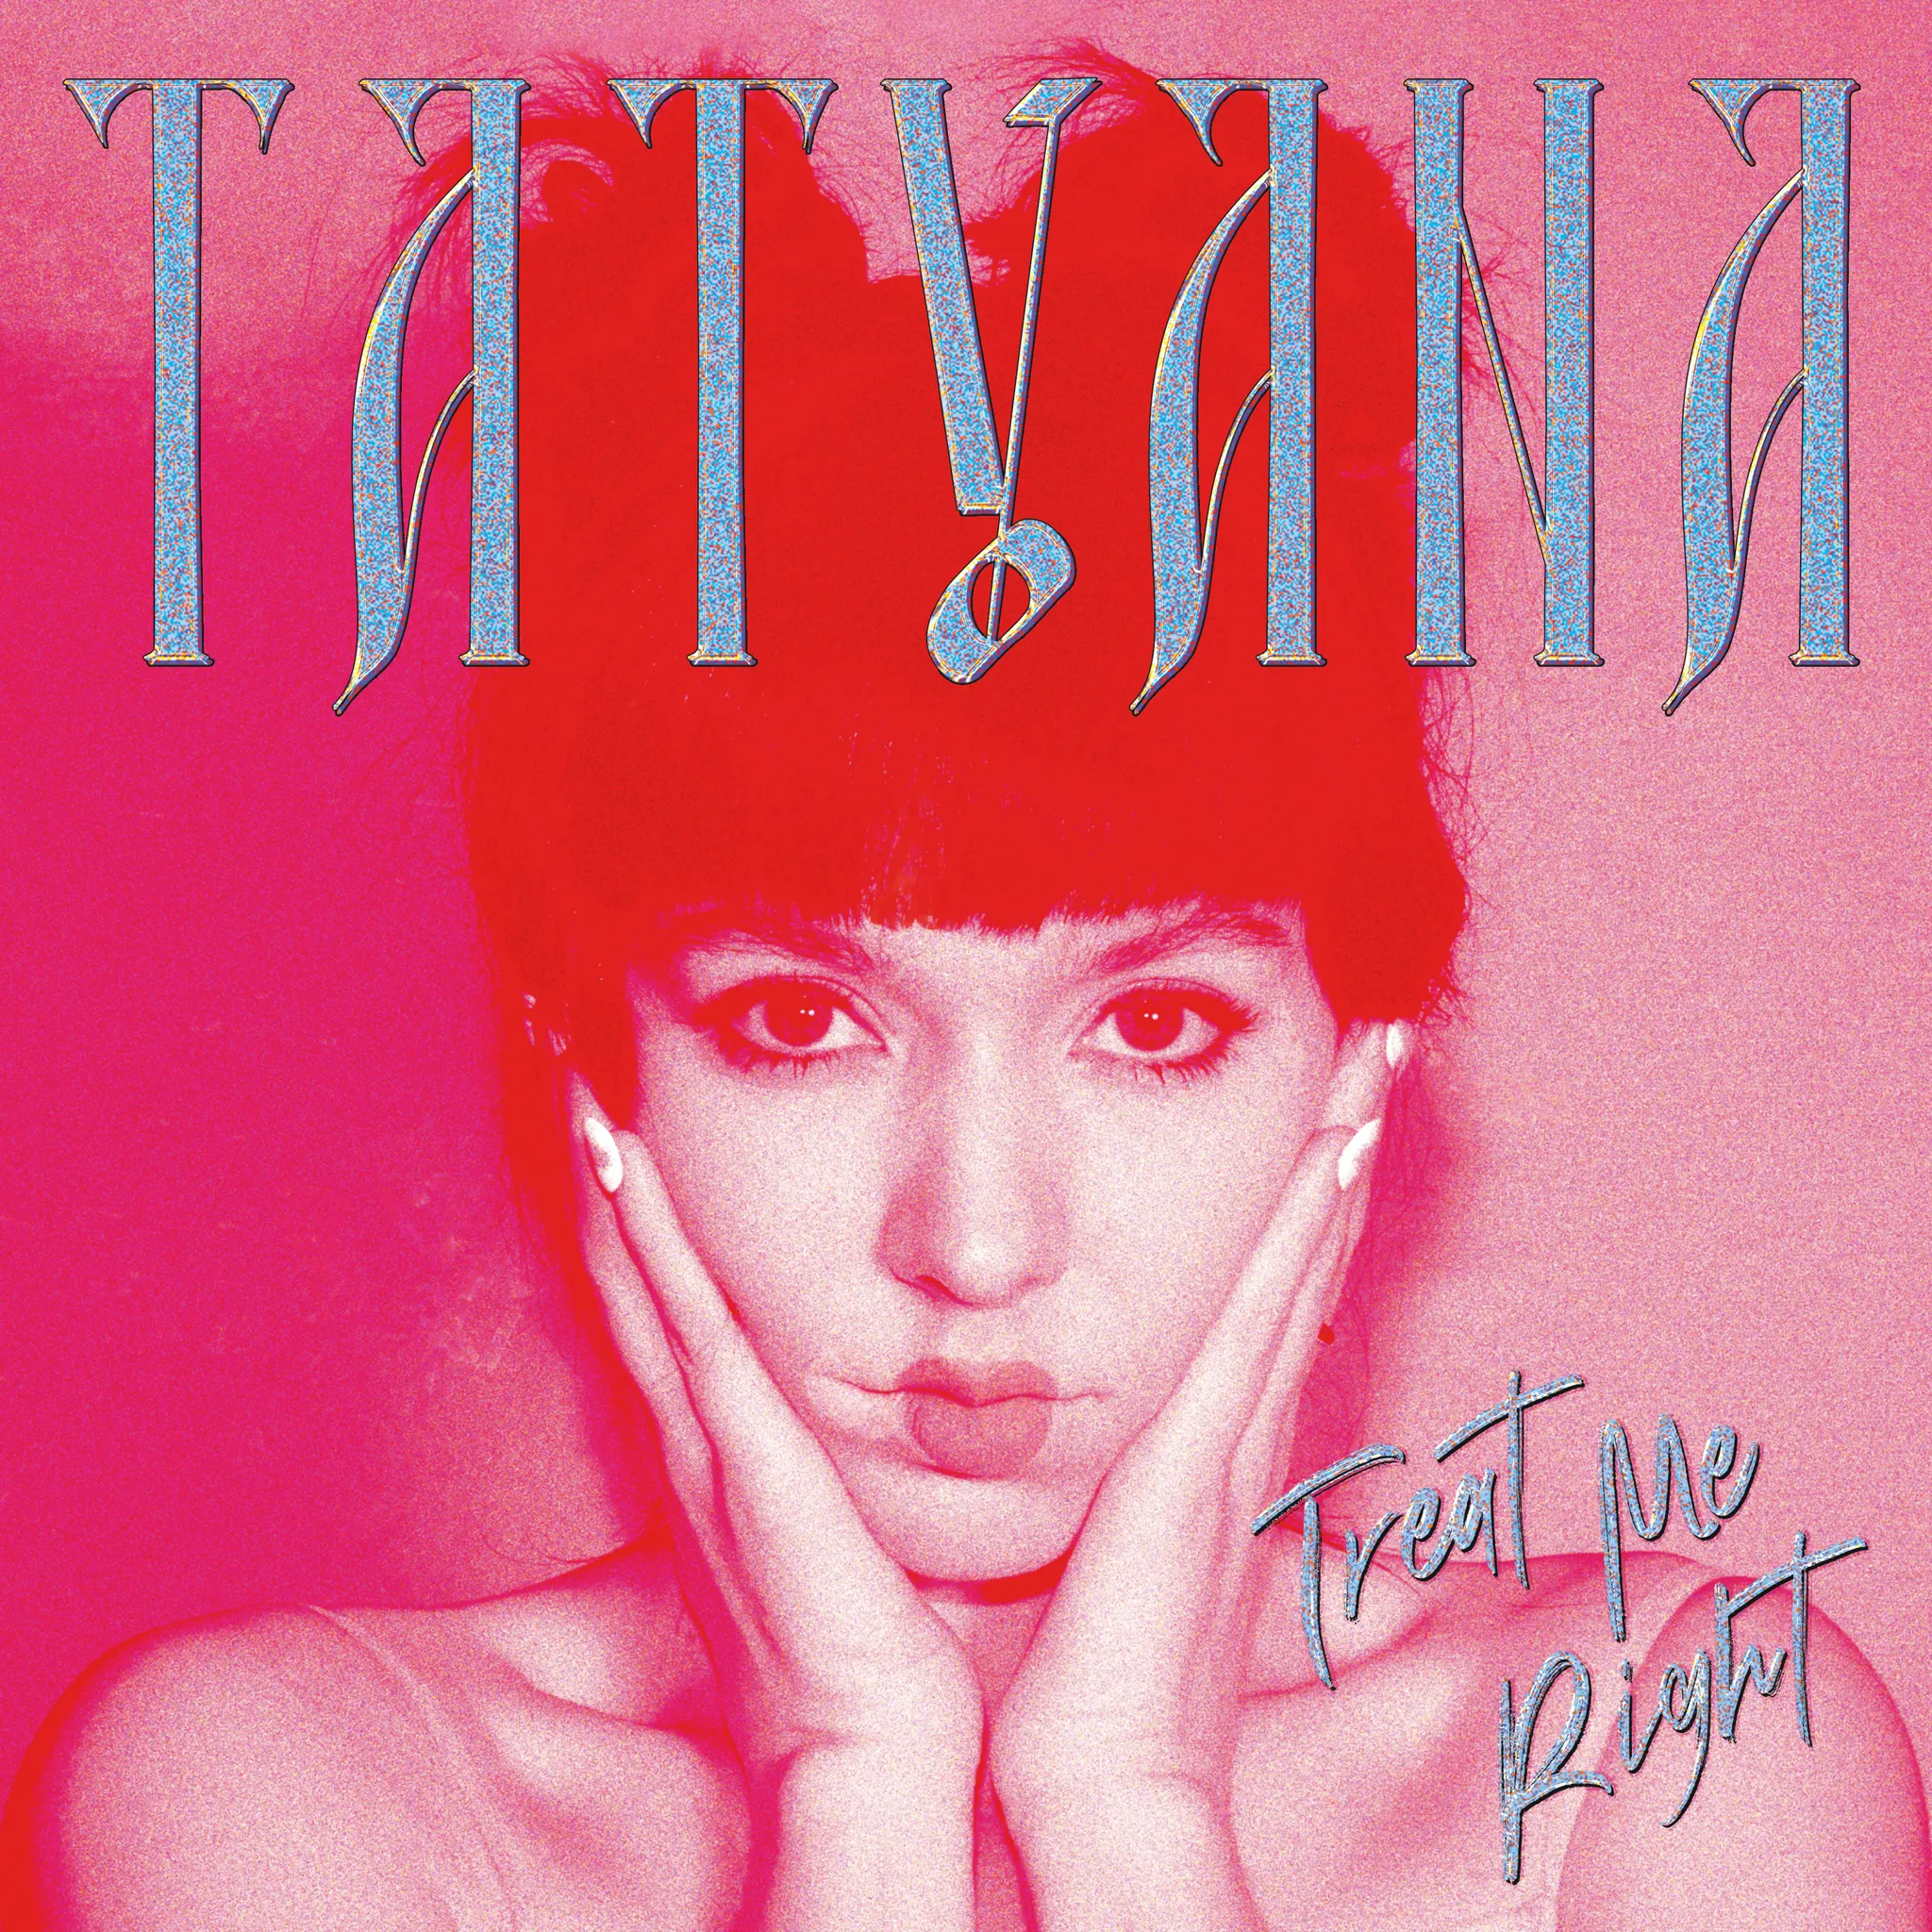 <strong>TATYANA - Treat Me Right</strong> (Vinyl LP - white)